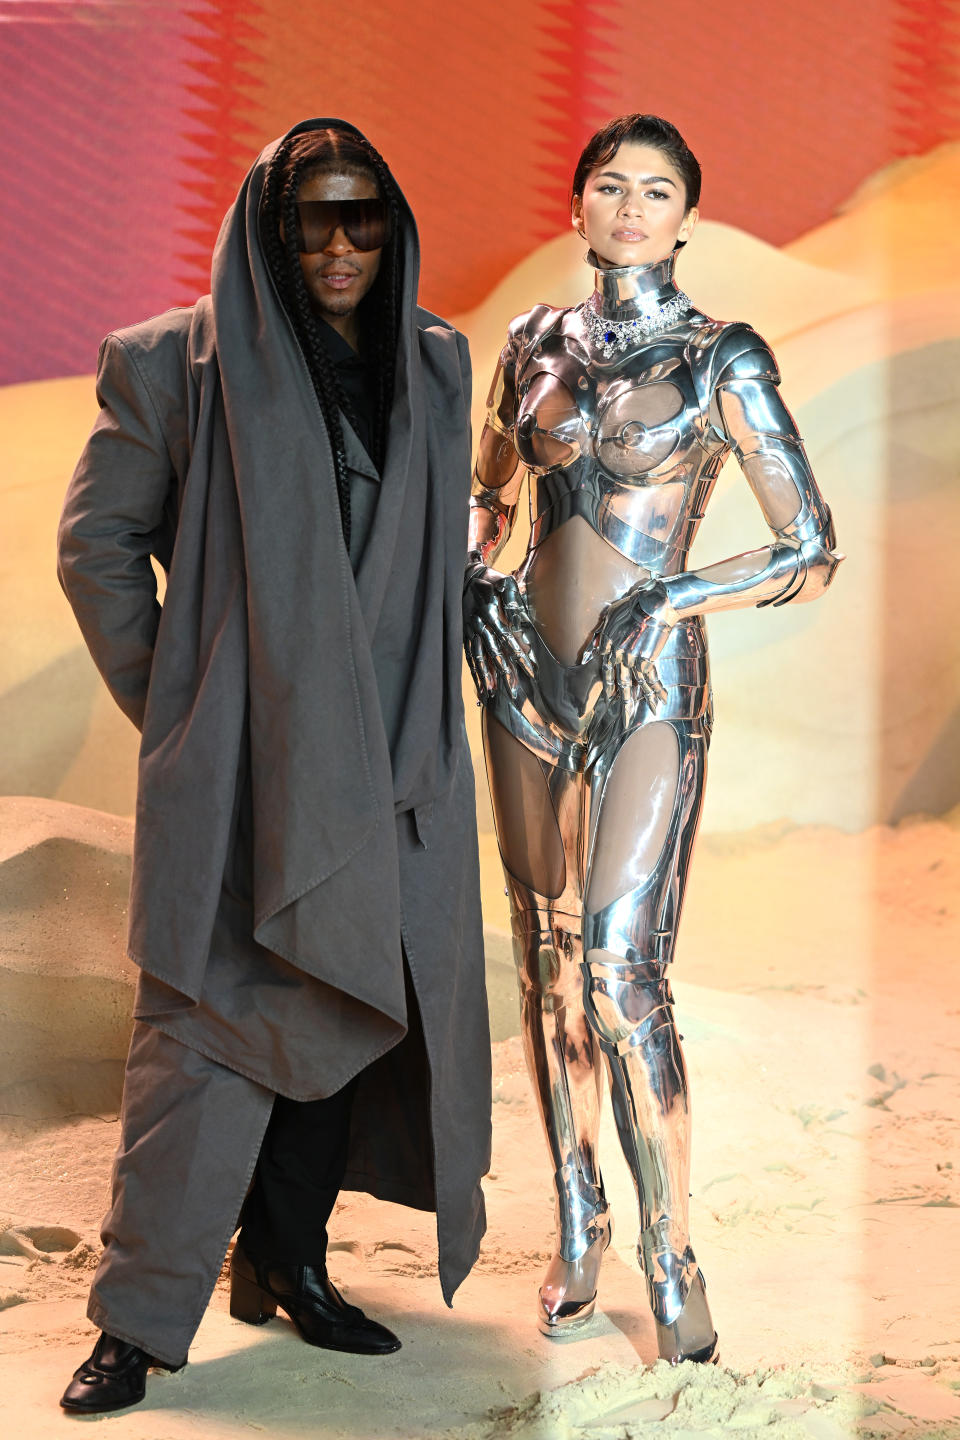 Zendaya in a metallic robot-inspired outfit and Law in a long coat with a hood